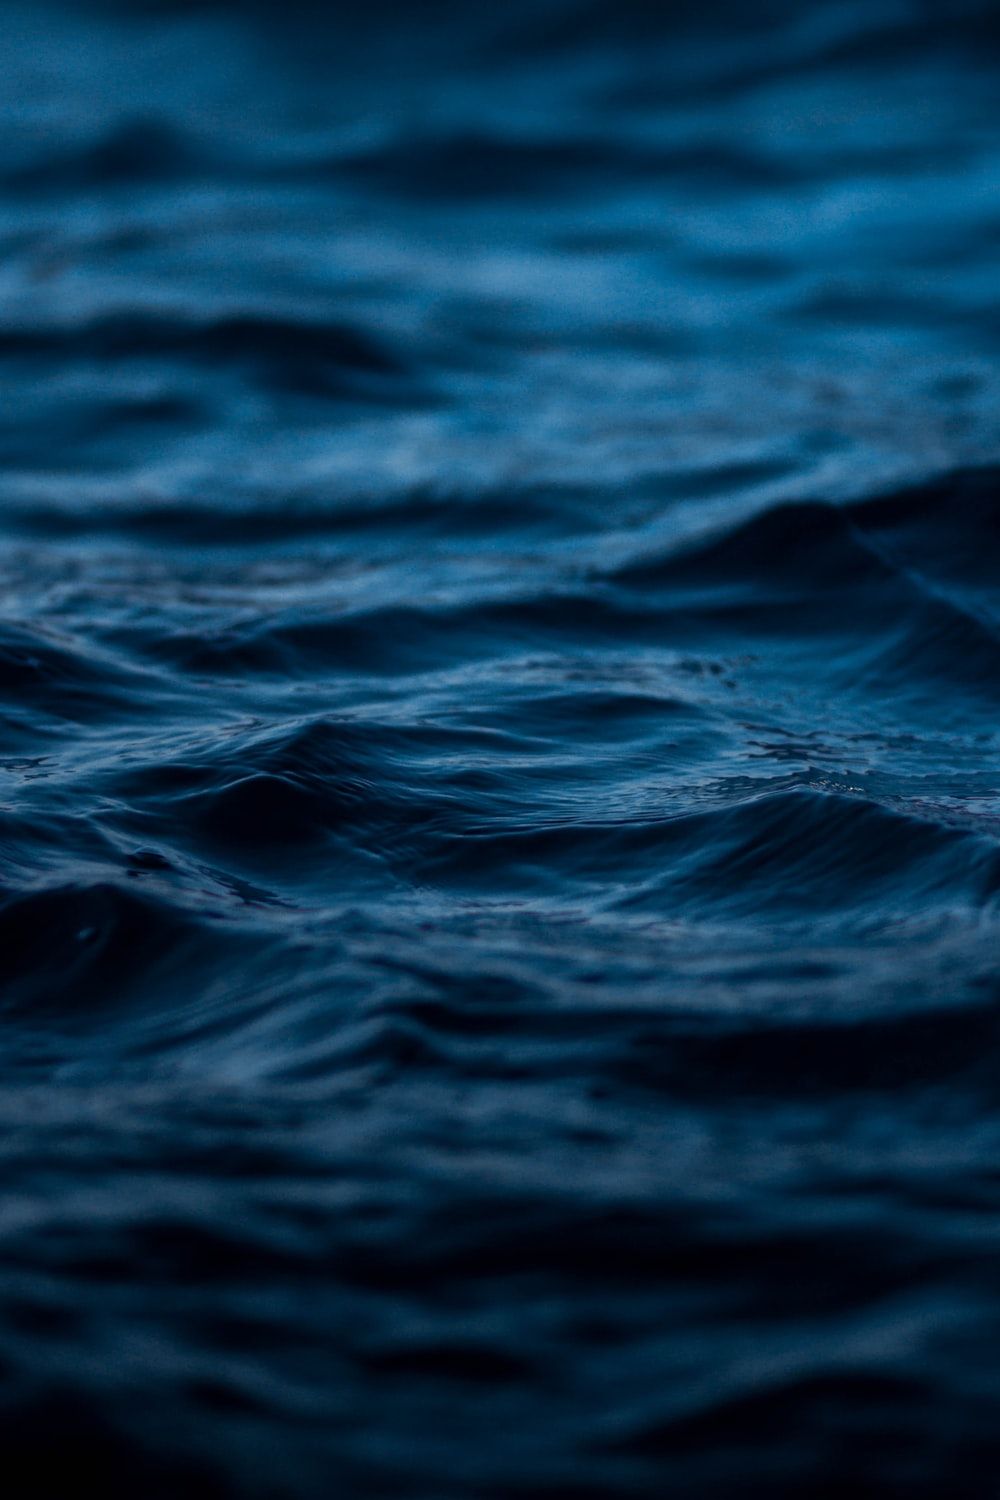 Dark Water Picture. Download Free Image